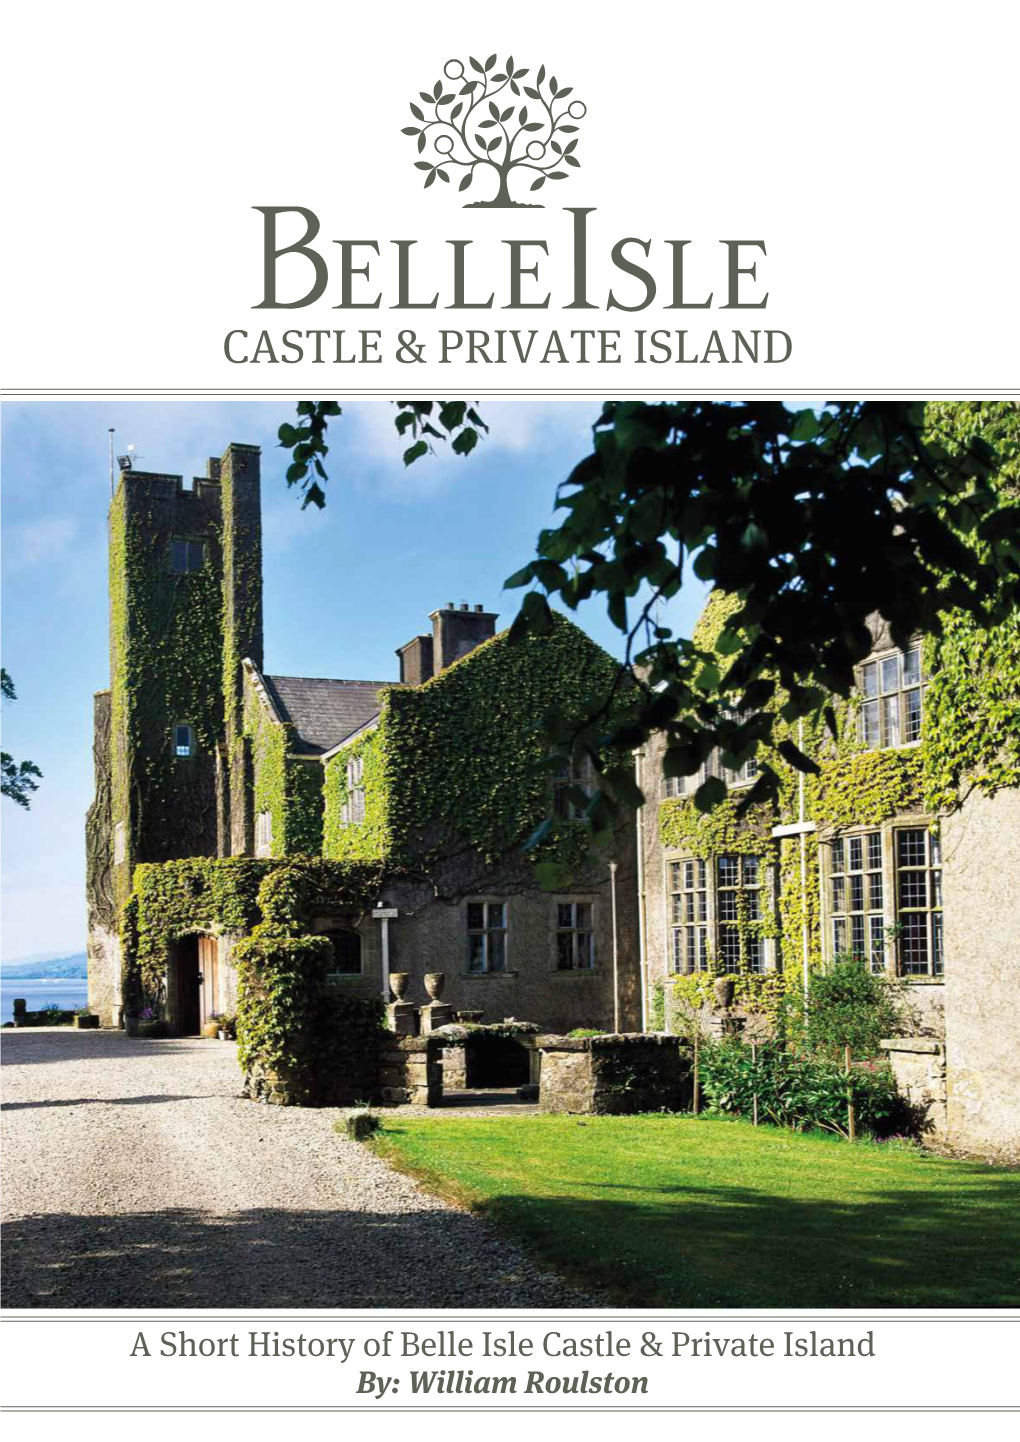 A Short History of Belle Isle Castle & Private Island By: William Roulston Descriptions of Belle Isle in the Seventeenth and Eighteenth Centuries